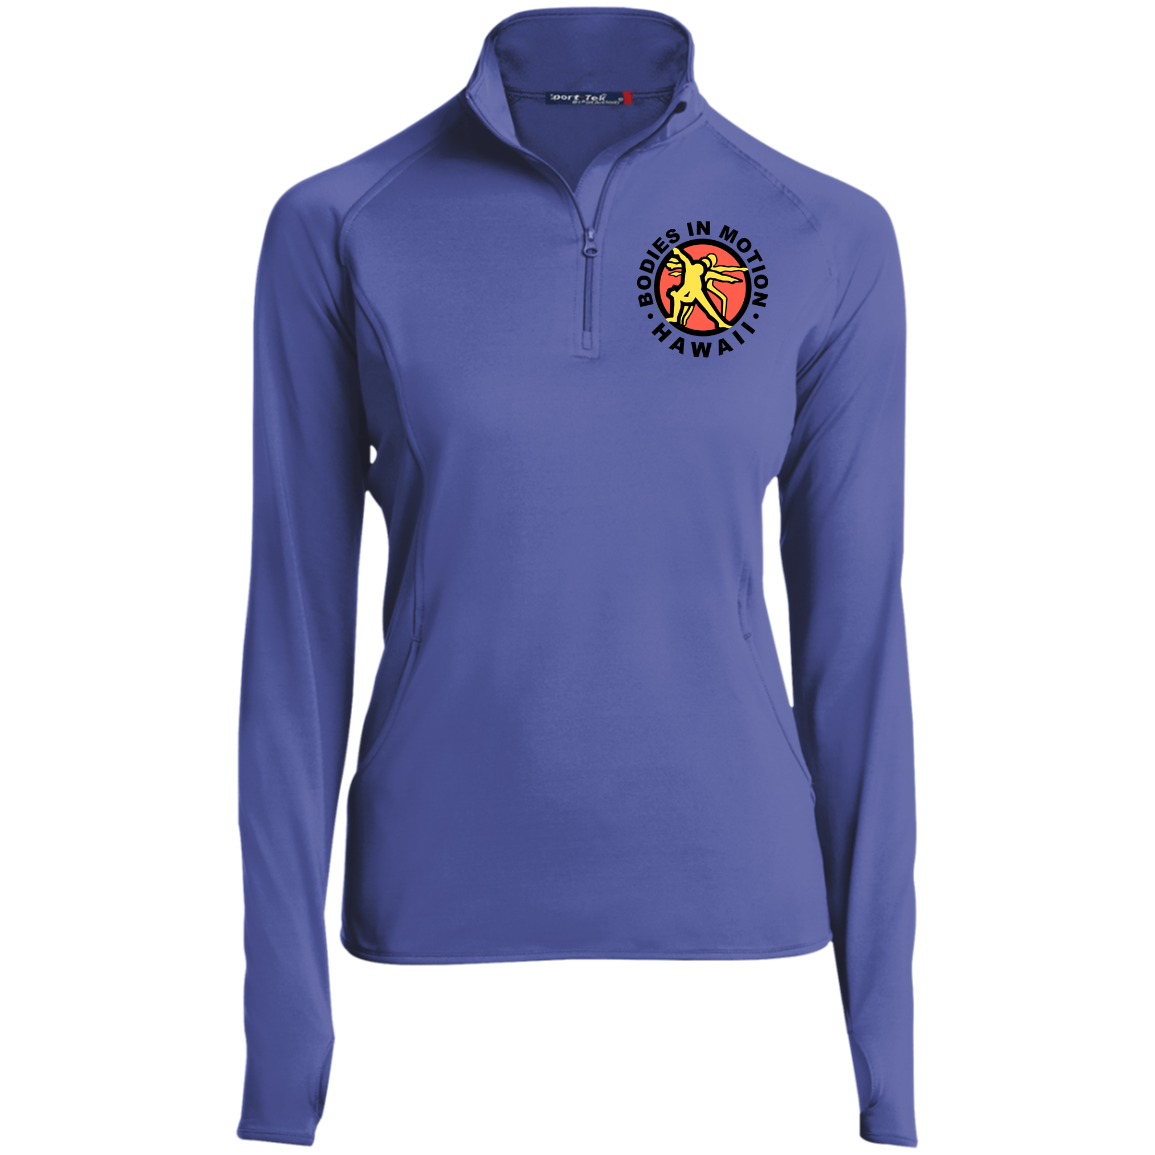 Bodies in Motion Women's 1/2 Zip Performance Pullover